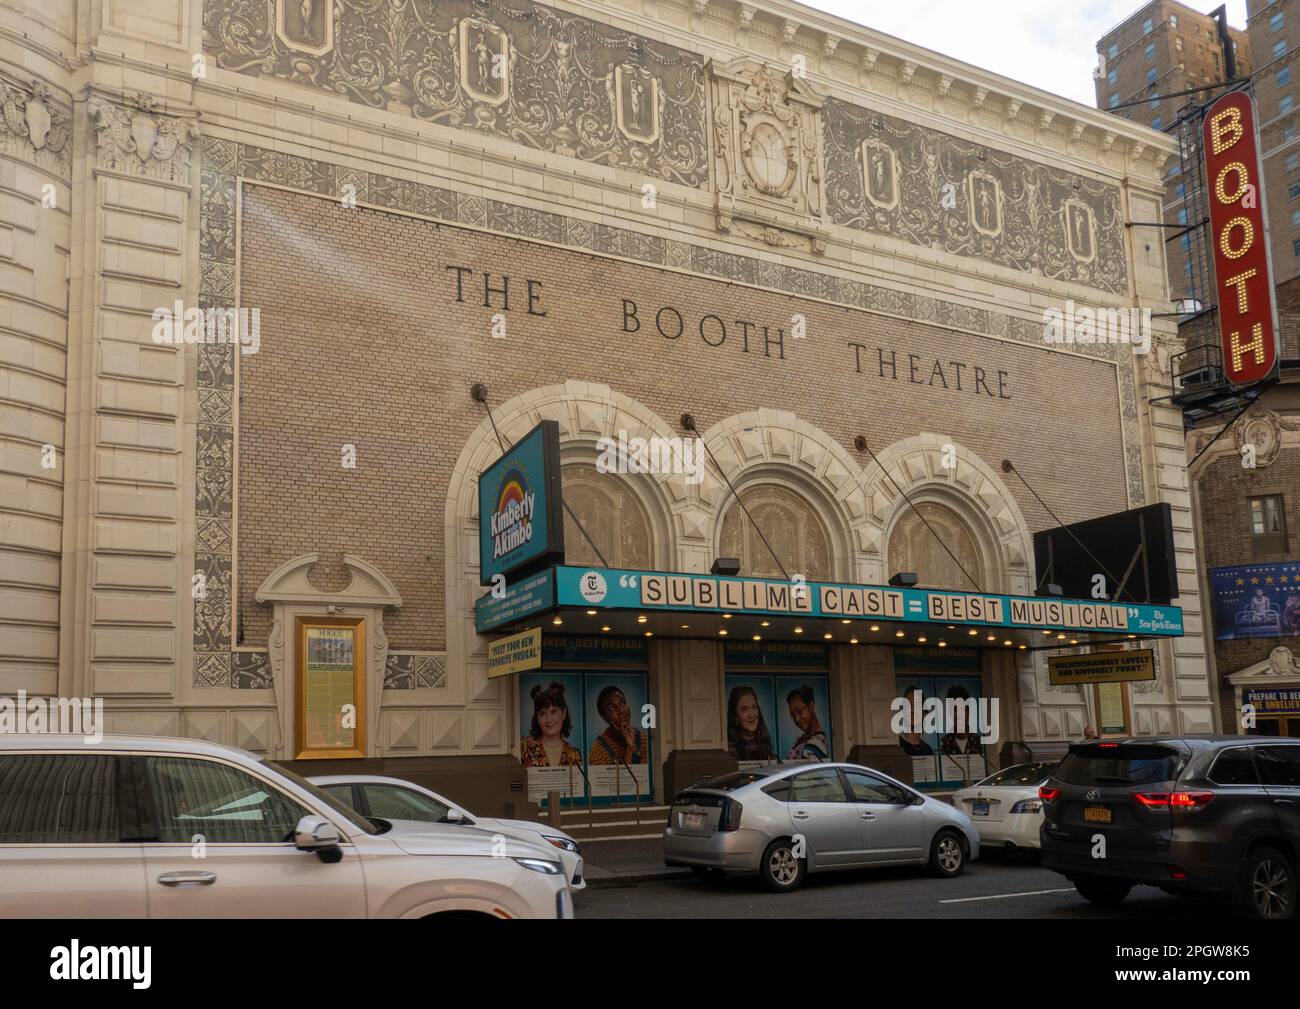 Plymouth and Booth Theatre: New York City, NY (Vintage)